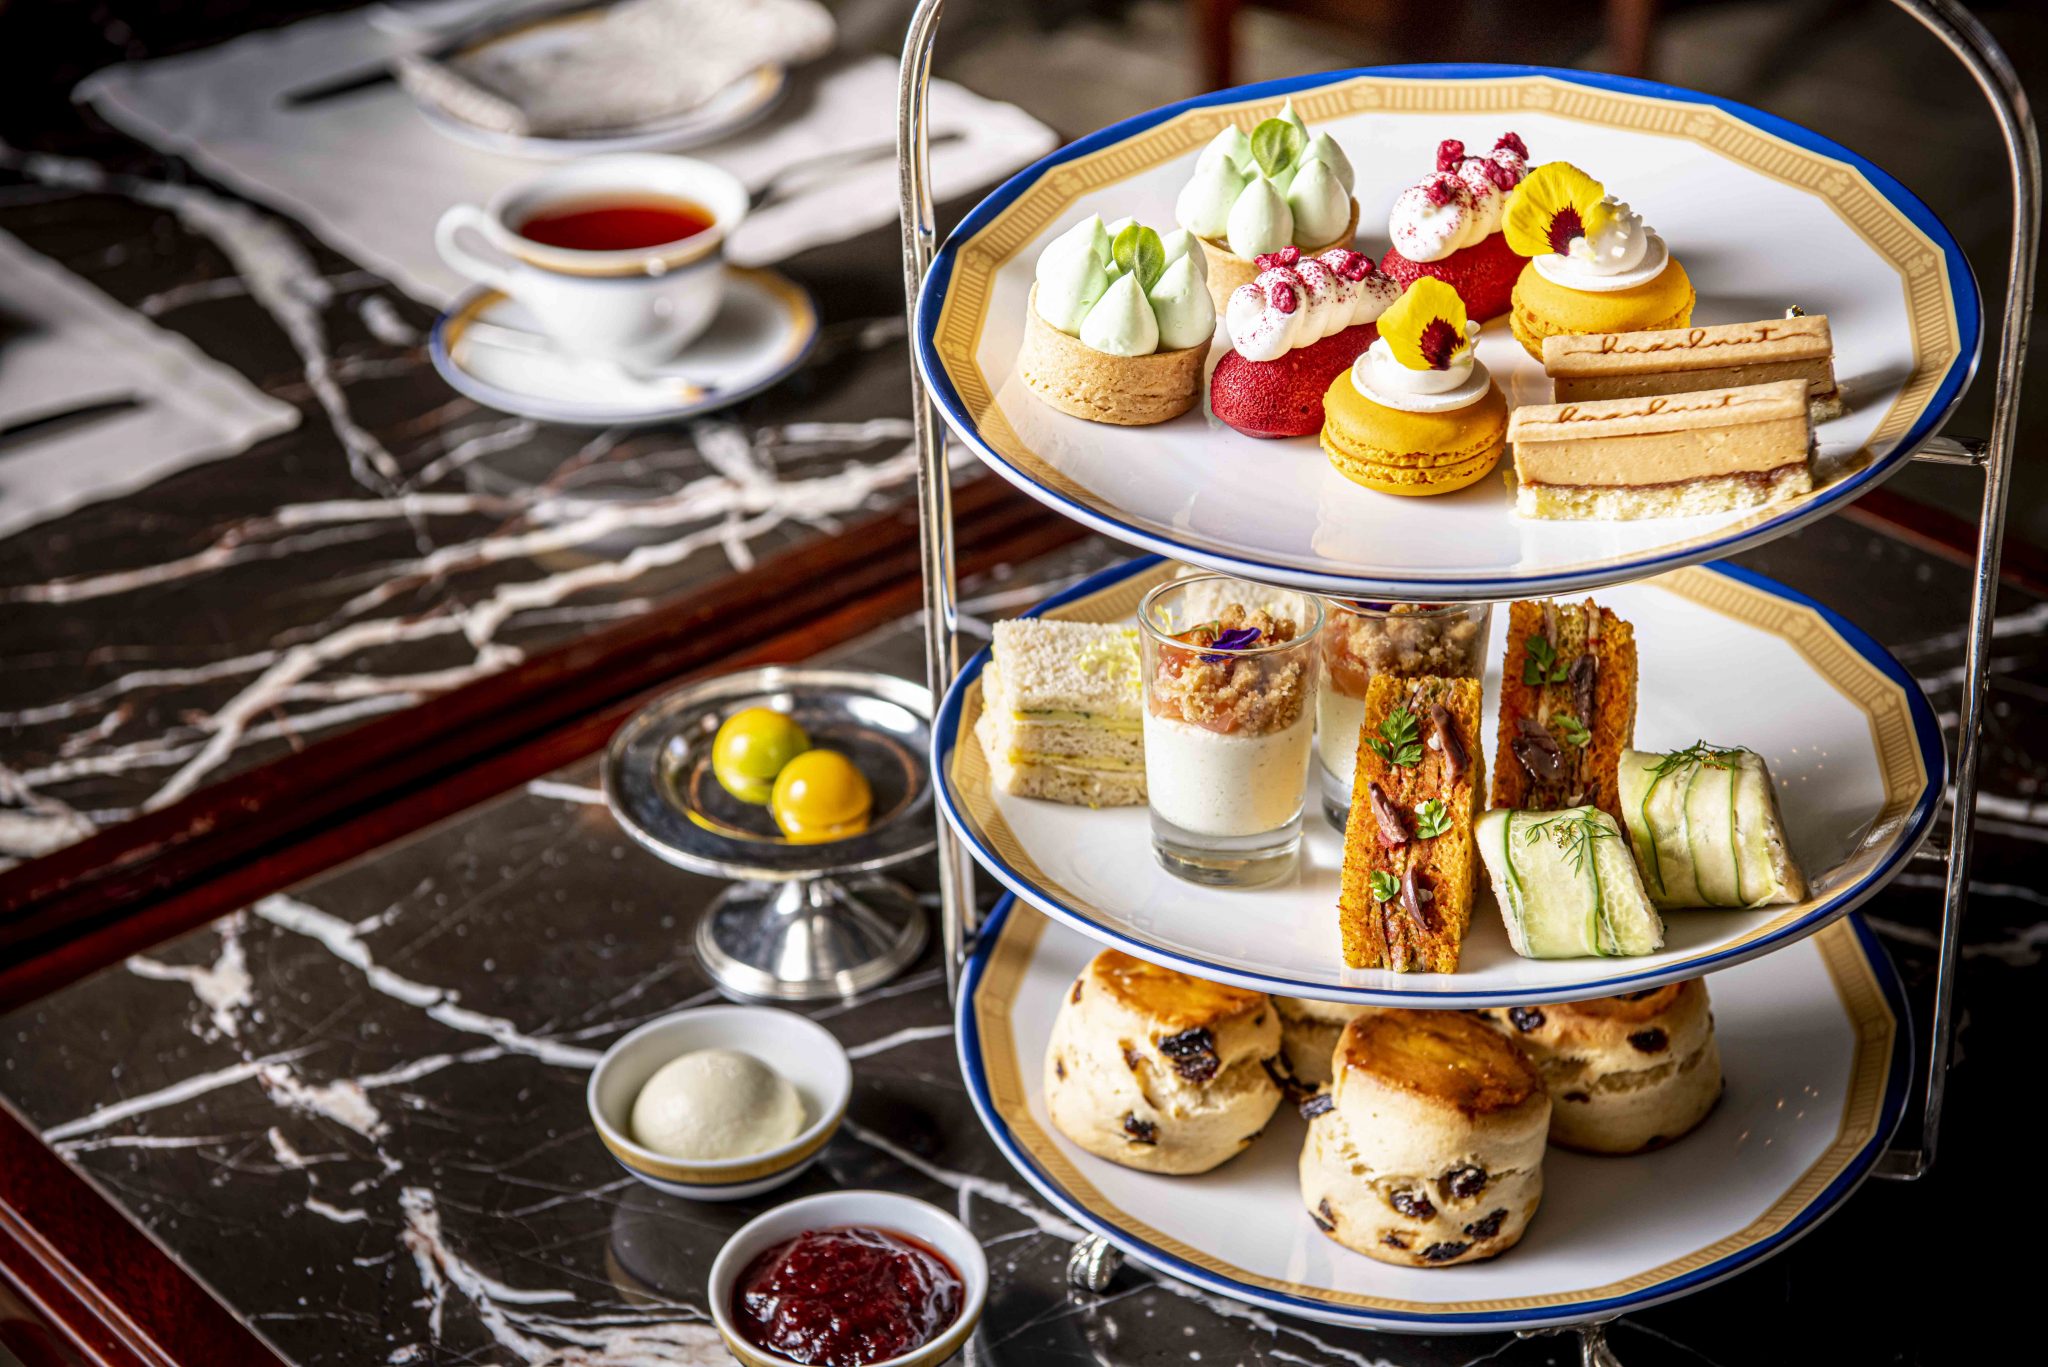 10 best takeaway afternoon tea sets in Hong Kong — Hashtag Legend